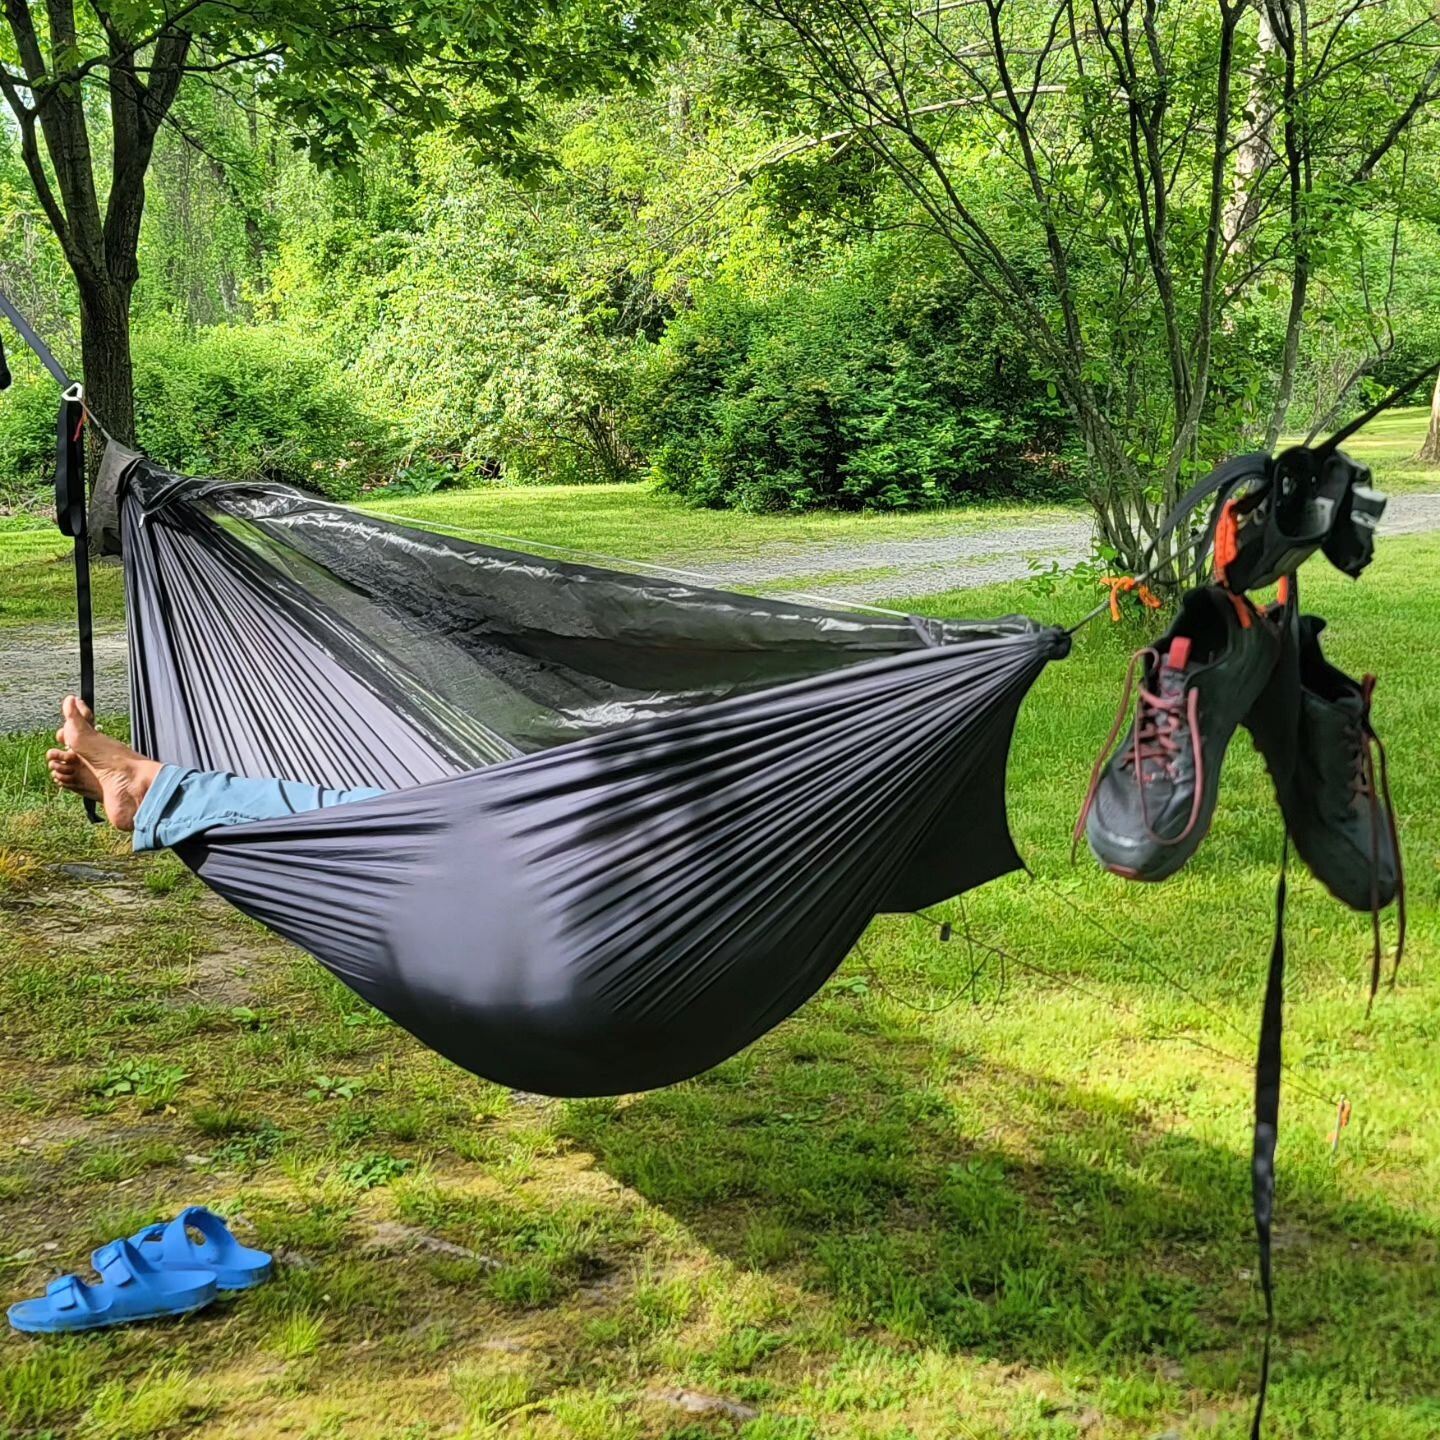 Looking to buy/sell/trade/donate your bike stuff or camping gear?

Head over to our Discord Server, link in bio.

#bikegear #csmpinggear #Discord #nycsadventurebikeshop #Hammock #camping #bikenyc